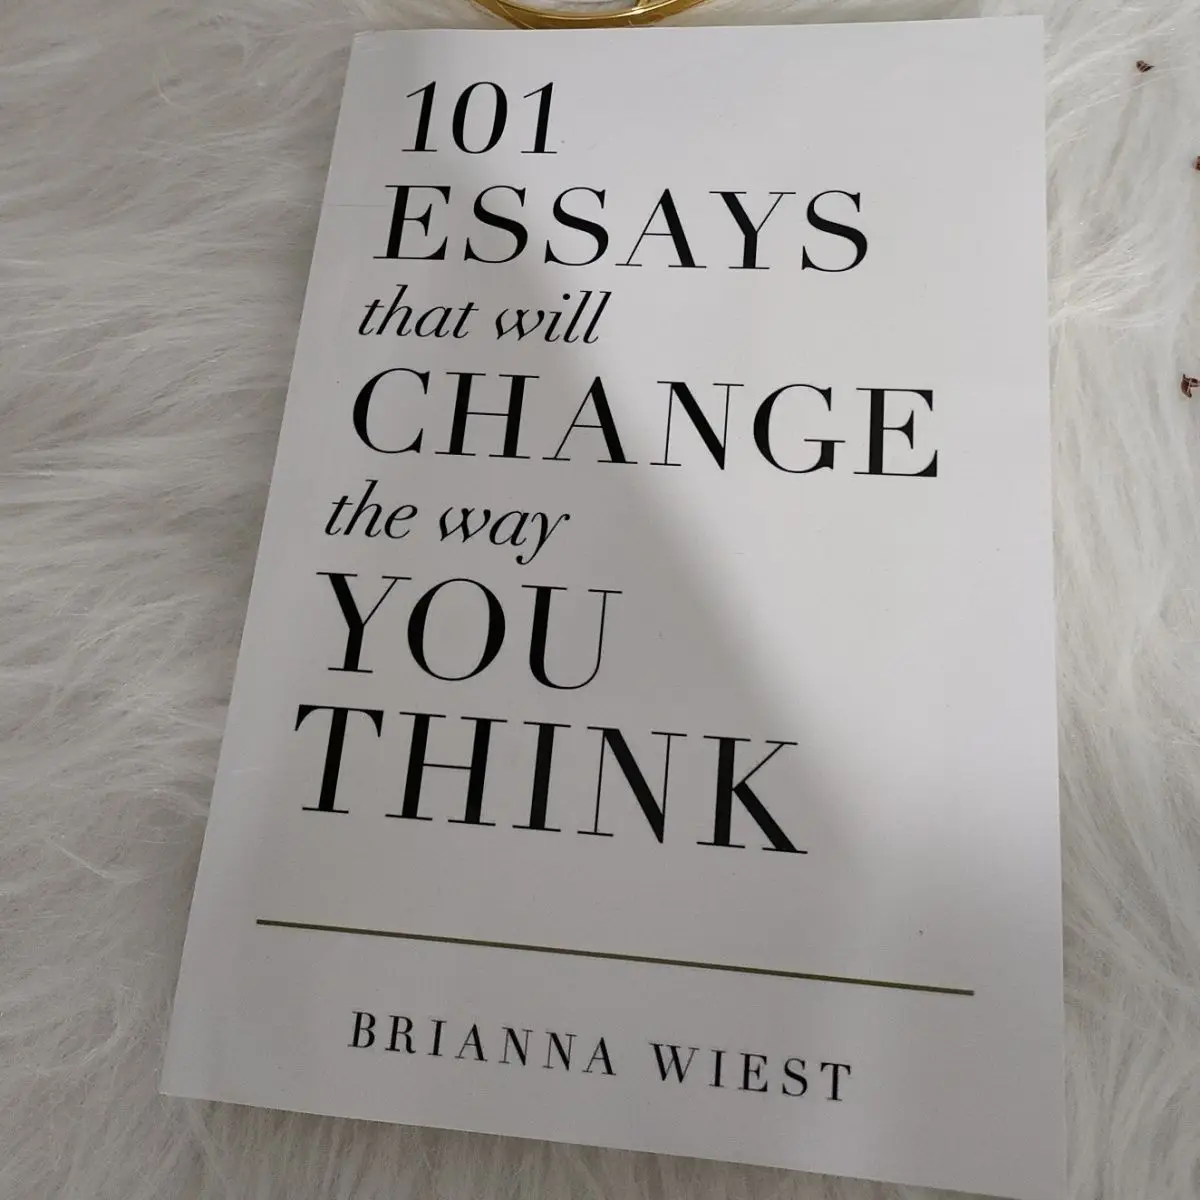 

101 Essays That Will Change The Way You Think By Brianna Wiest Books English Books for Adults Inspirational Encourage Cogitation